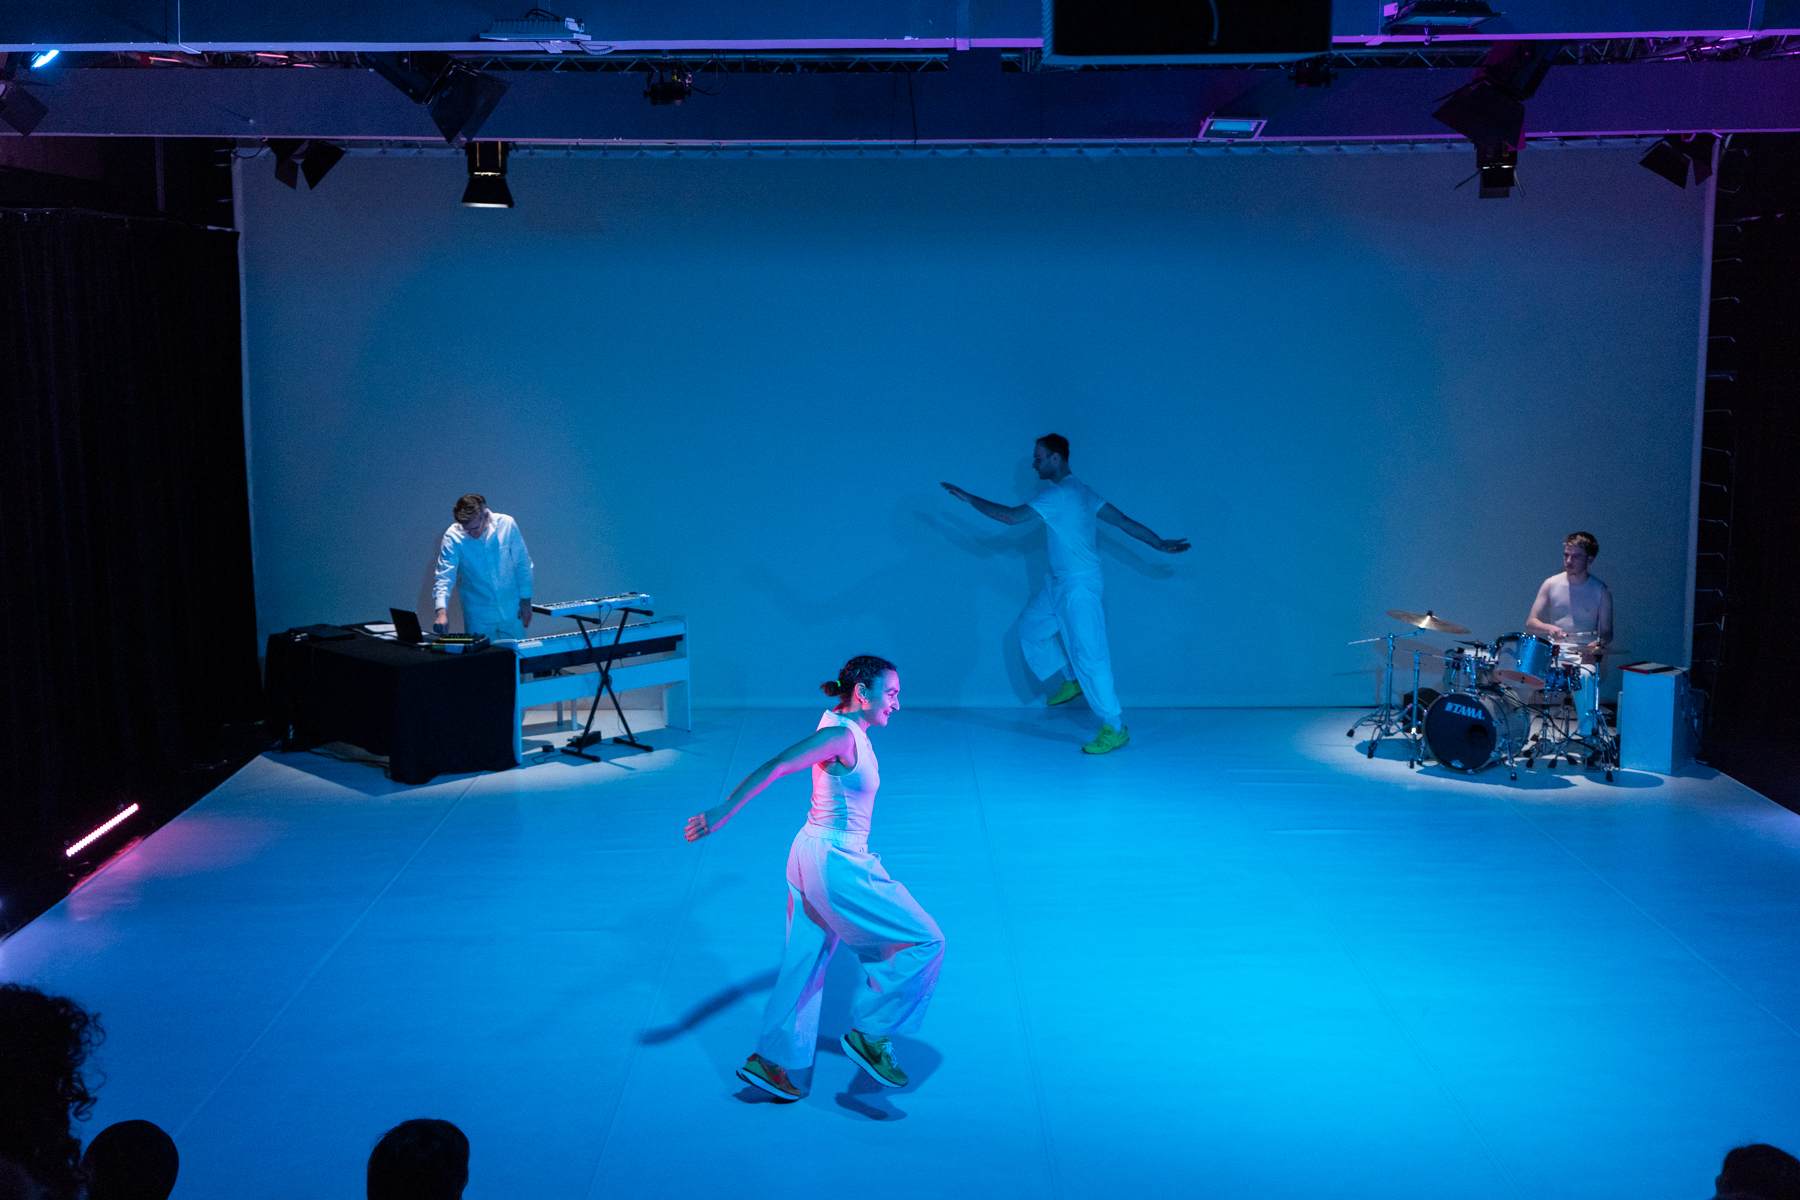 Two dancers skipping in a circle and two musicians playing on stage